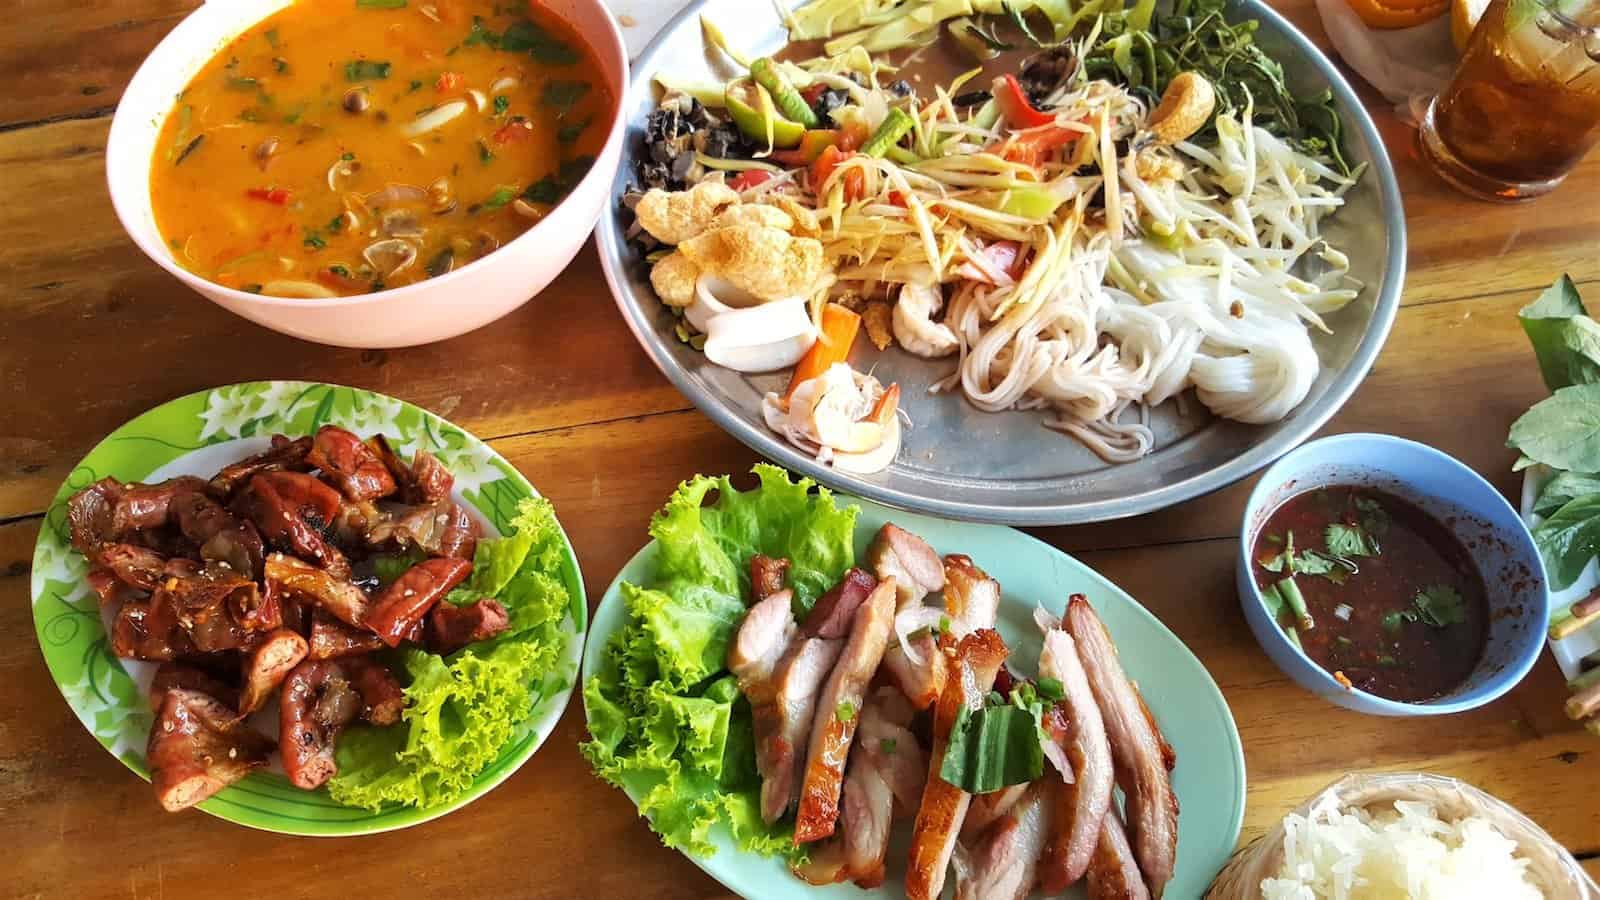 noodles with vegetables near meat with cabbage and stewed food in bowl. bali vs thailand cuisine